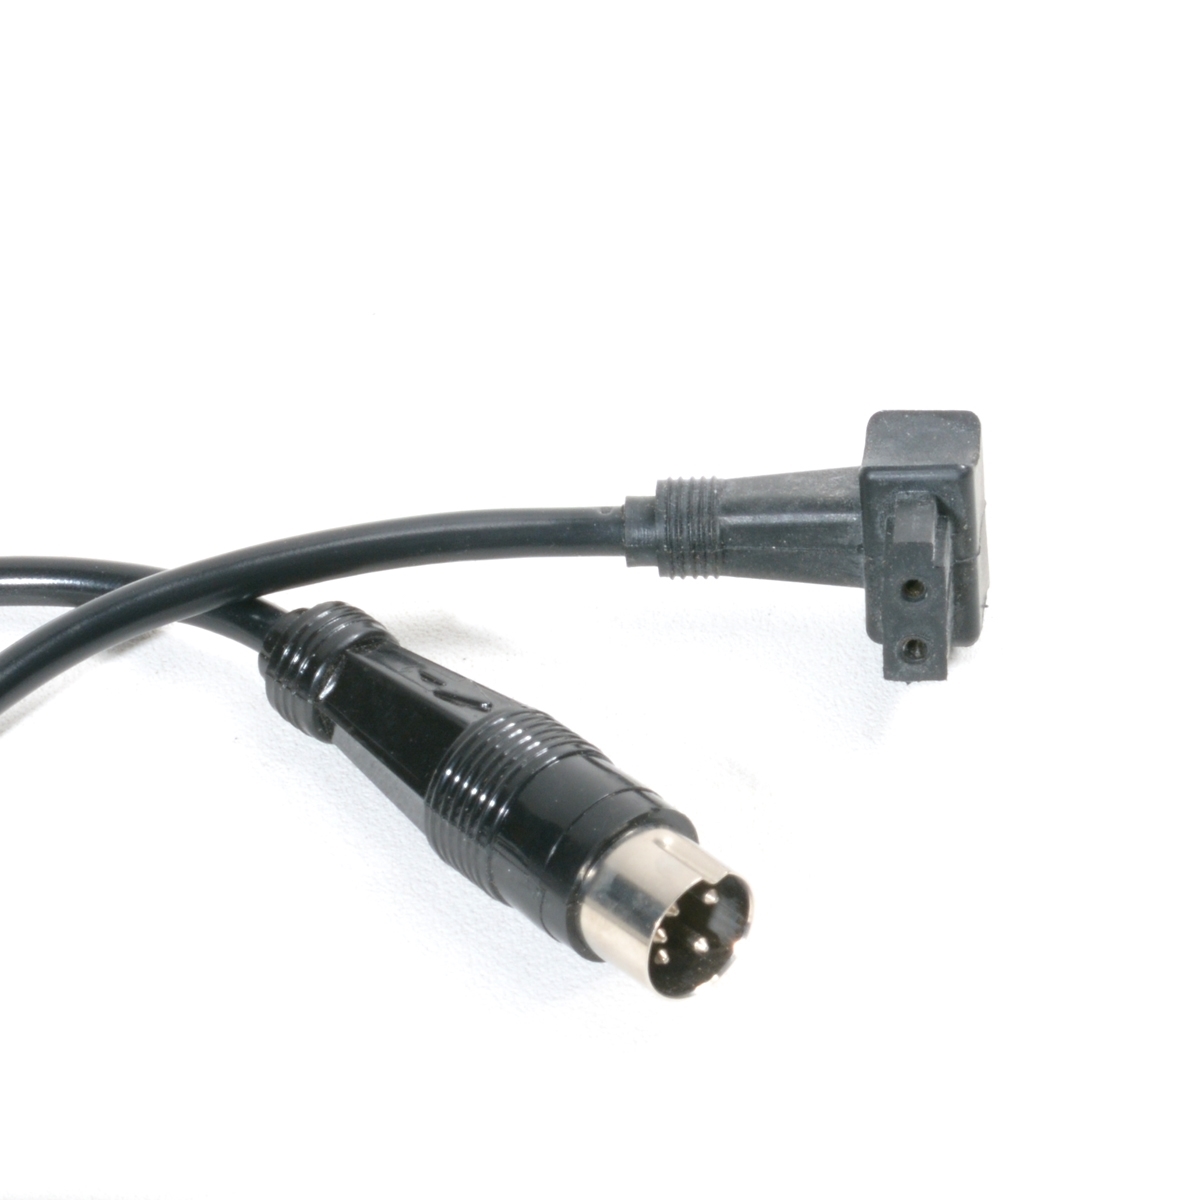 LCM5 HV Cycler Cable for Metz Flashes Lumedyne VCM5 